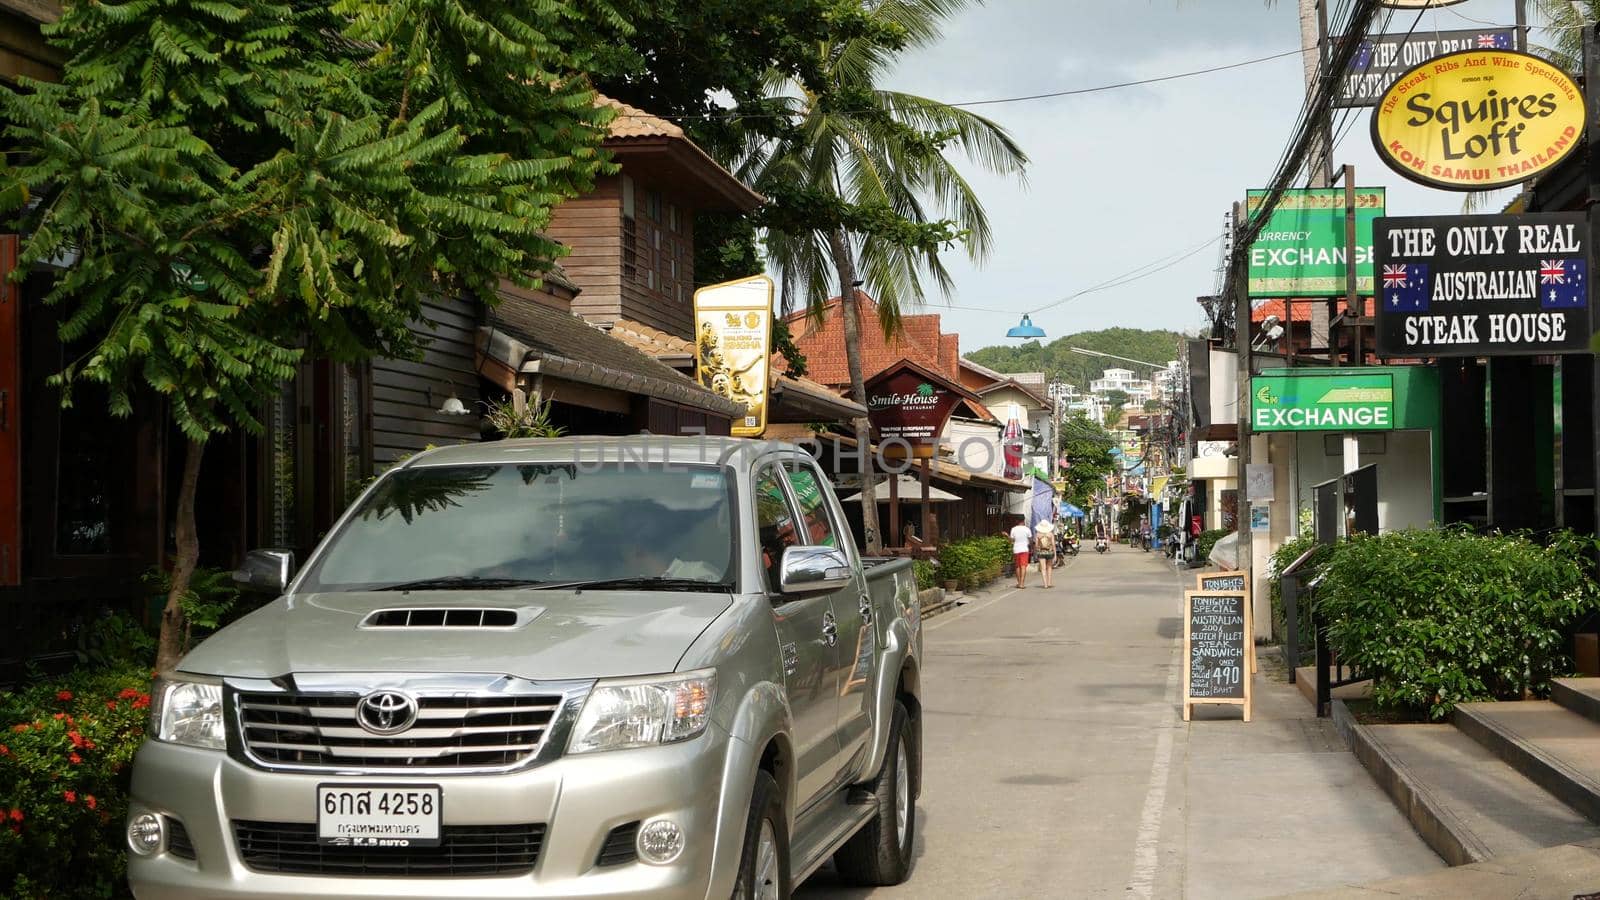 SAMUI ISLAND, THAILAND - MAY 27, 2019: Typical touristic street in Fisherman village with souvenir stores. View of calm lane of city in Asia with touristic shops in daytime. Thai people on motorbikes